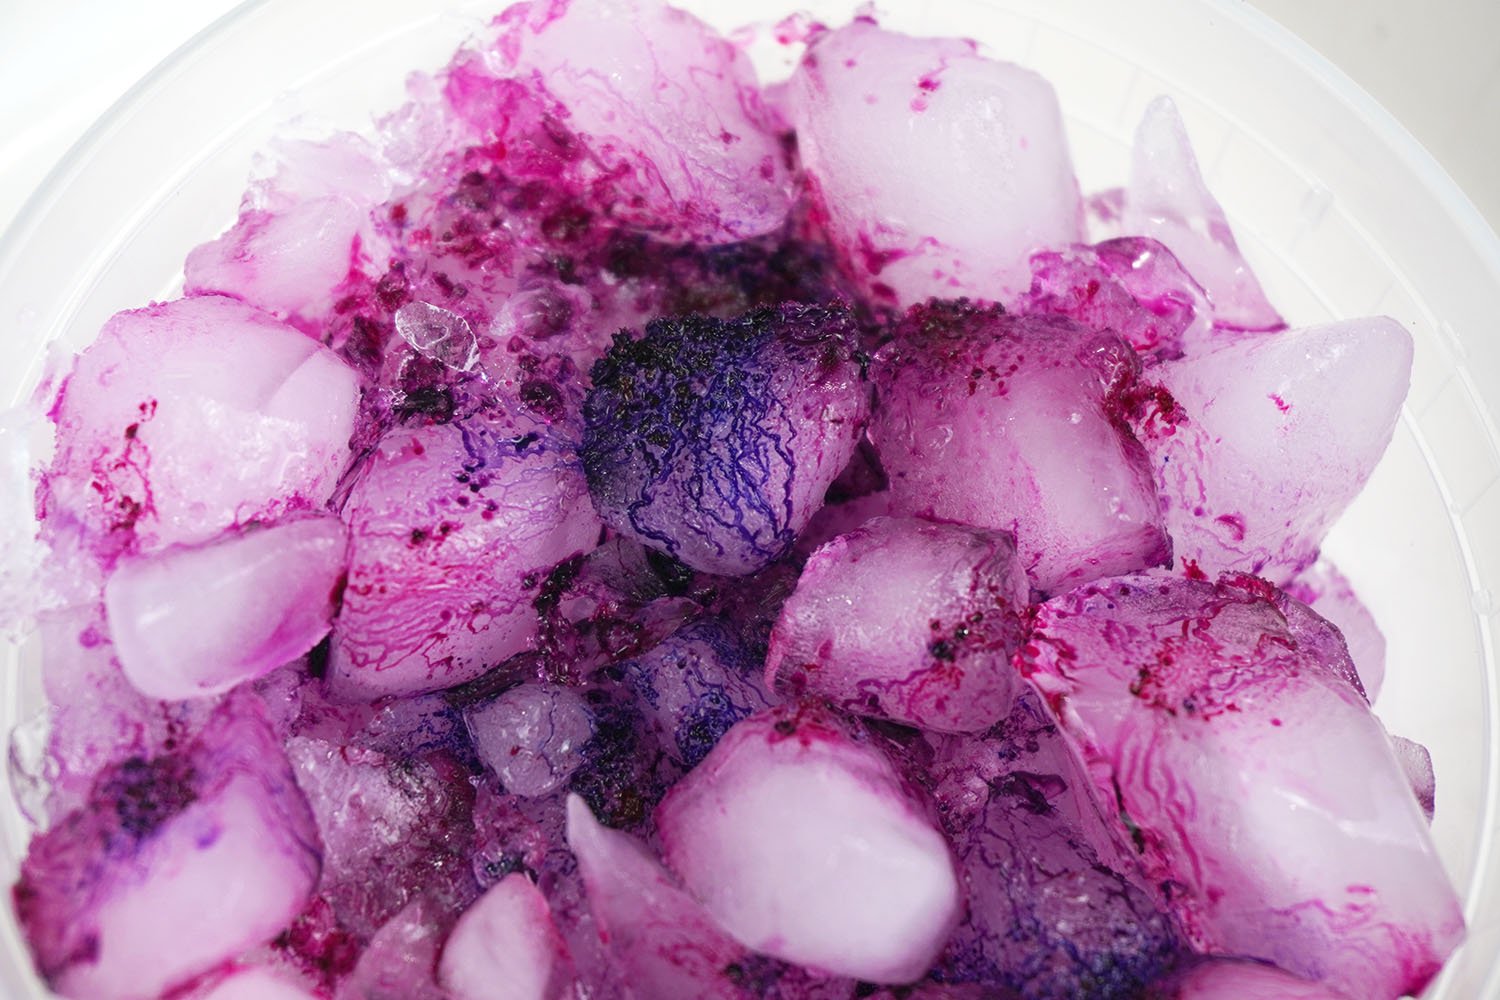 Close up of fuchsia dye splitting into blue and pink colors on ice